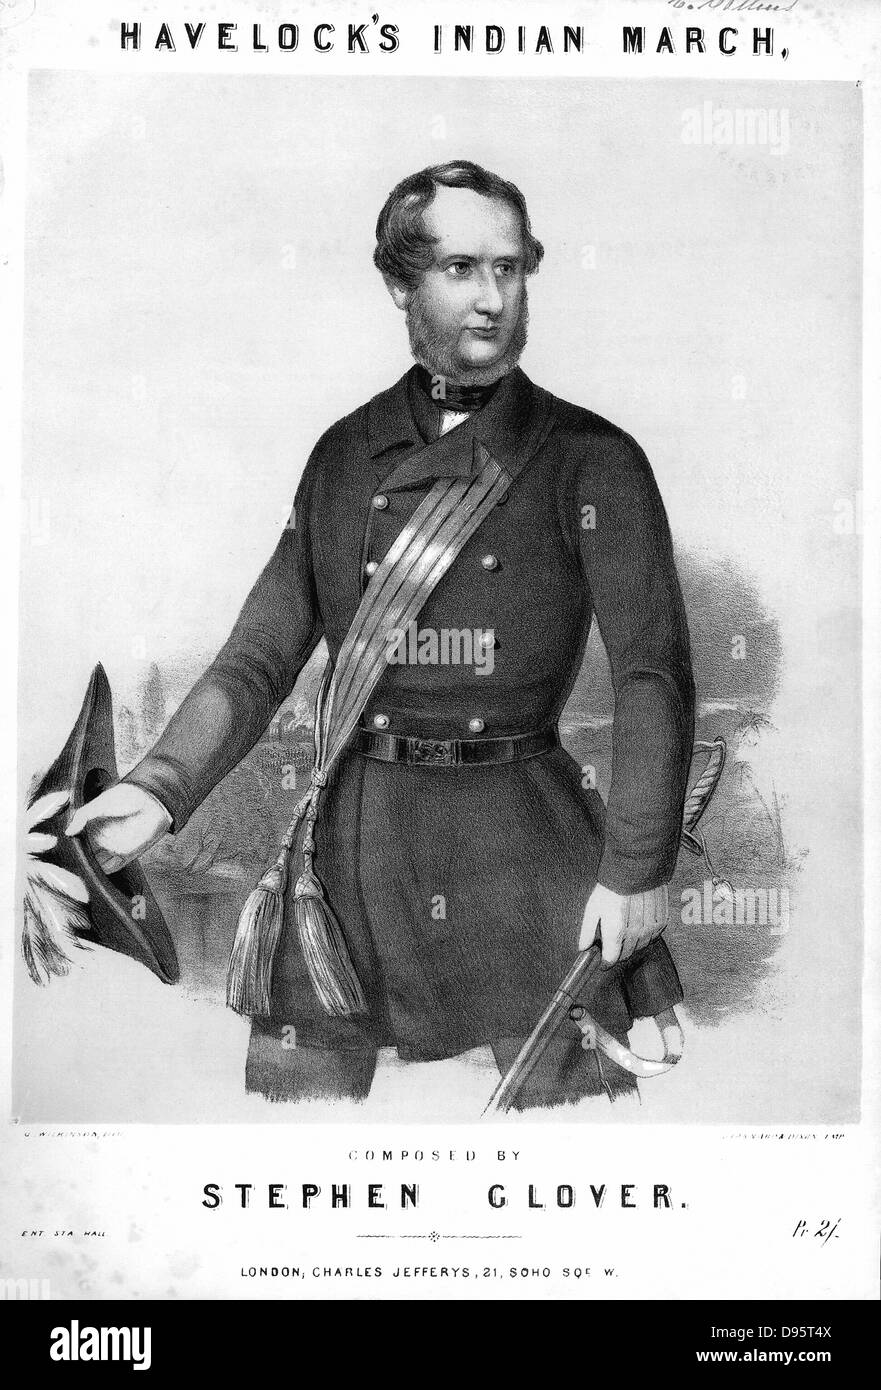 Henry Havelock (1795-1857) British soldier, Major-General 1857. During Indian Mutiny (1857-1859) took part in both reliefs of Lucknow, Sept and November 1857. Died of dysentery. Tinted lithograph from cover of 'General Havelock's Indian March' composed by Stephen Glover c1857 . Stock Photo